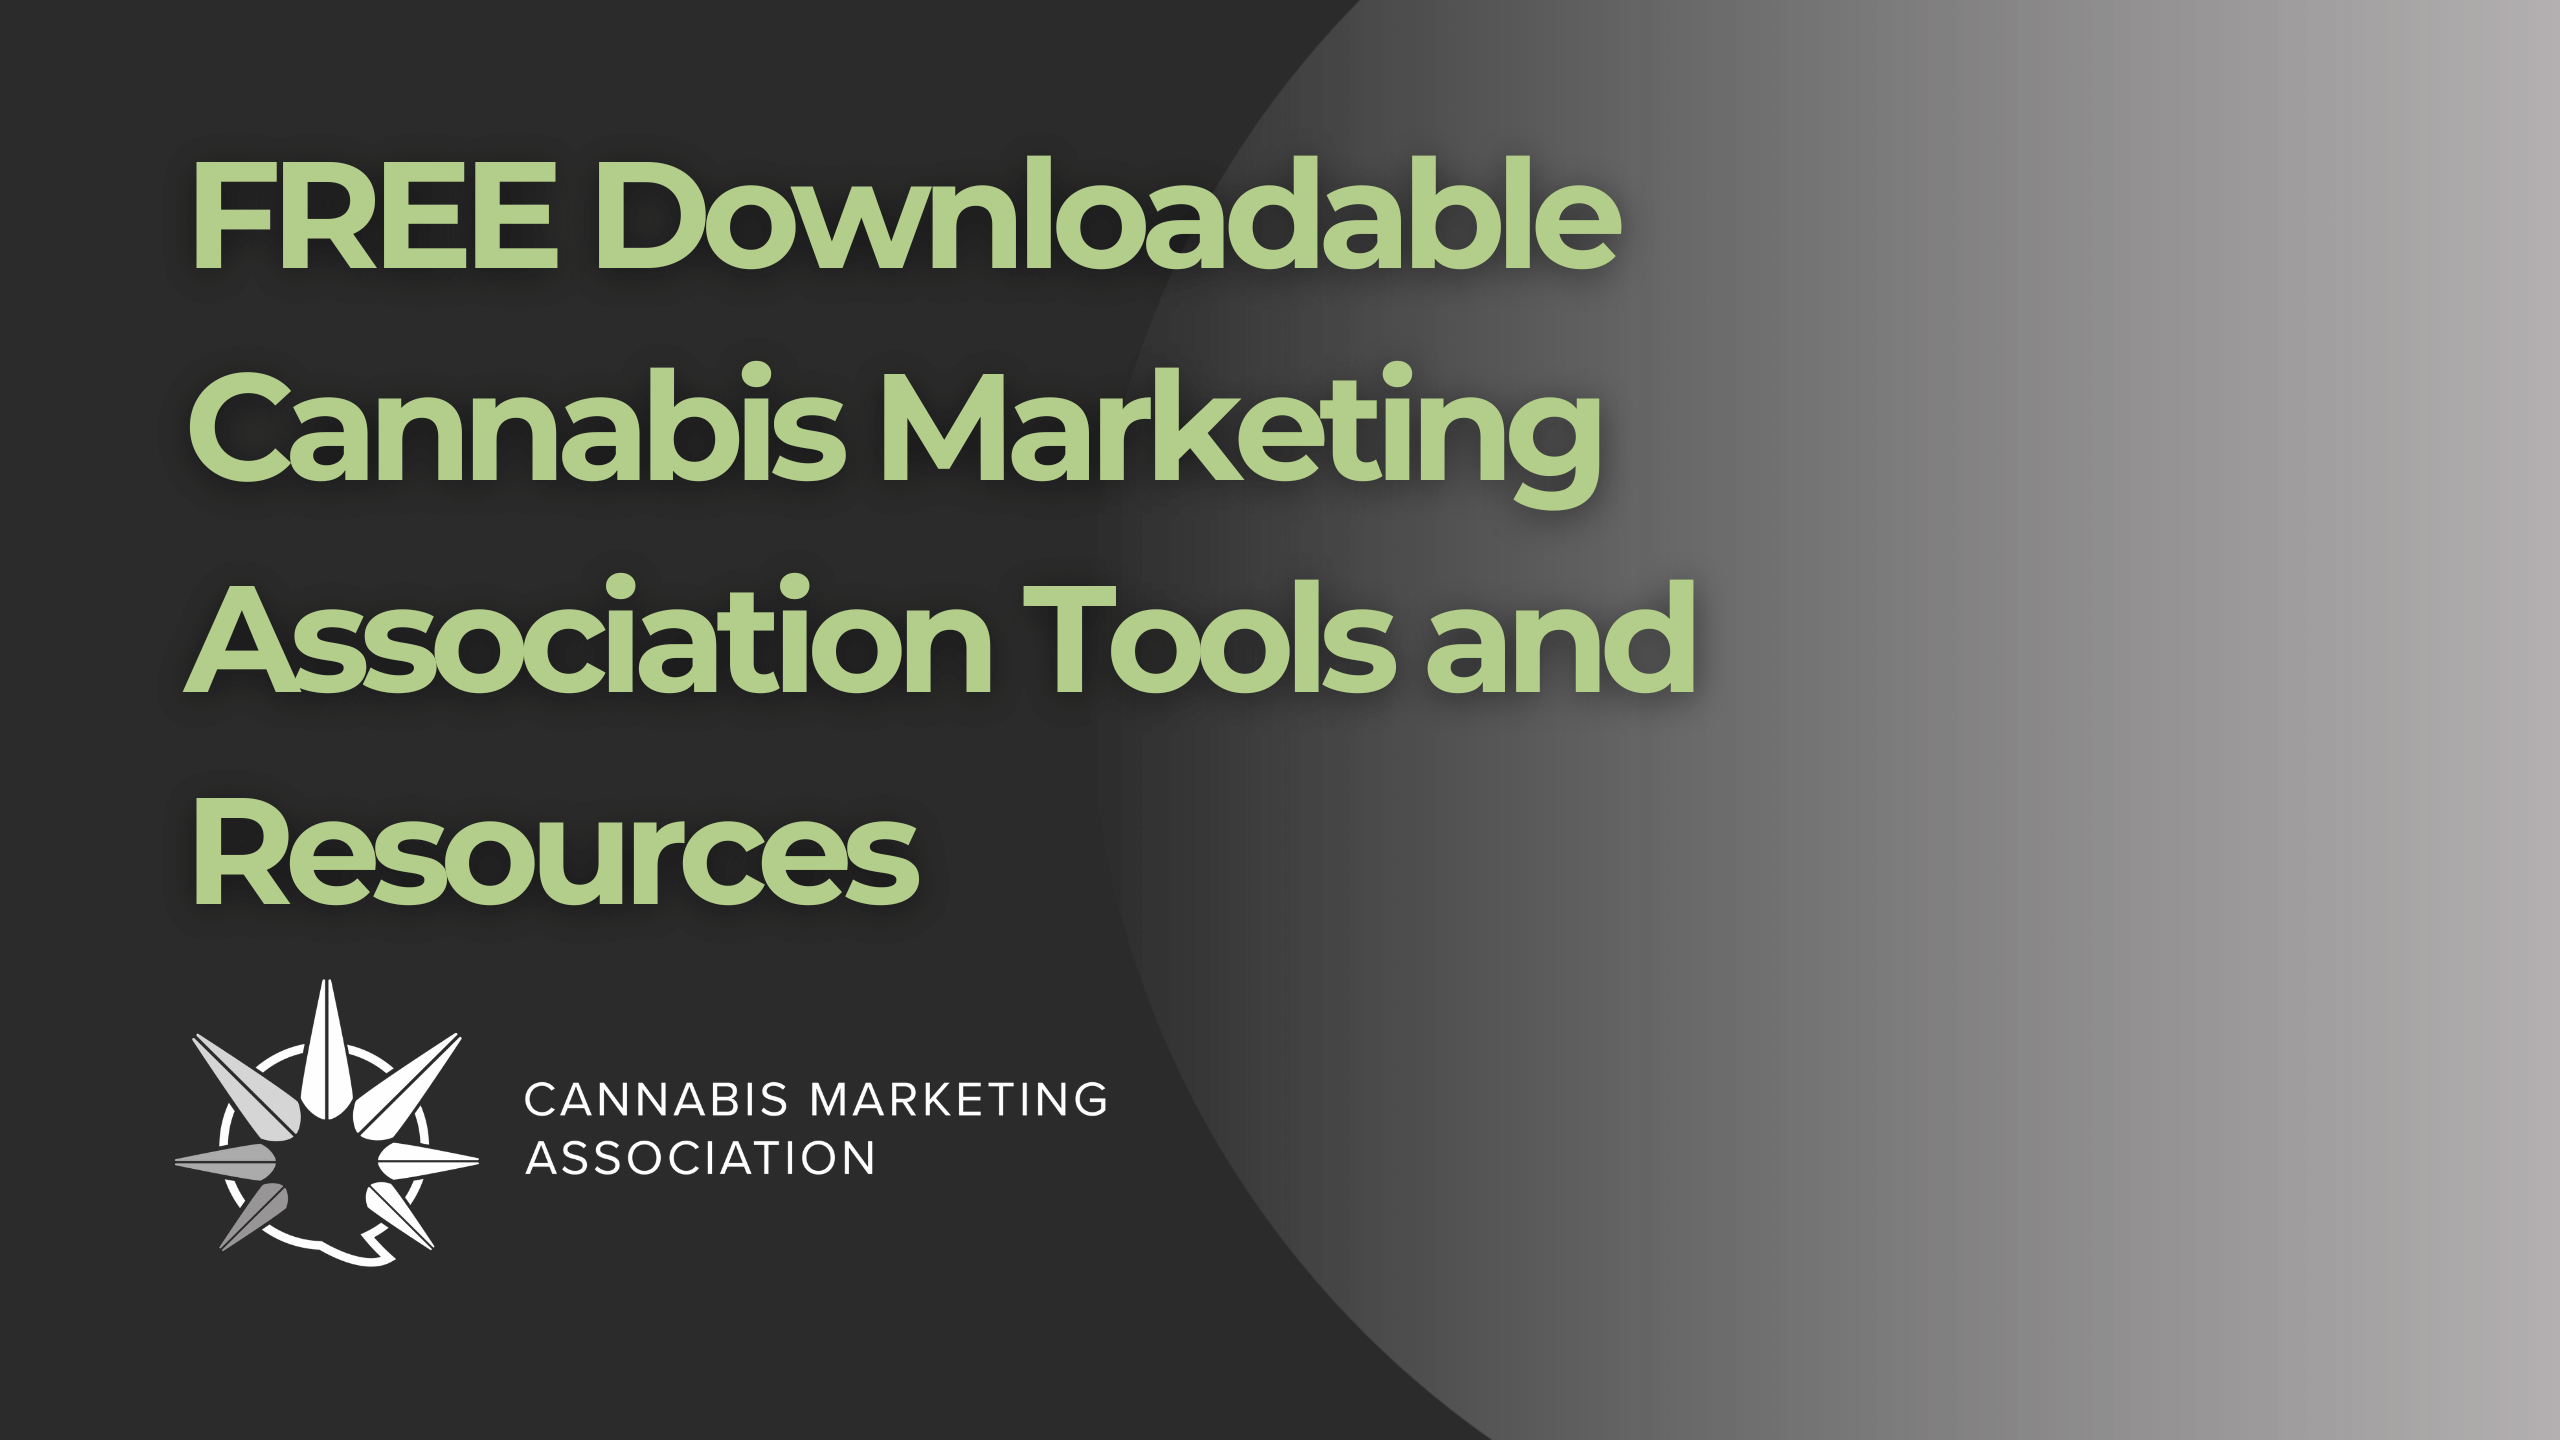 FREE Downloadable Cannabis Marketing Association Tools and Resources